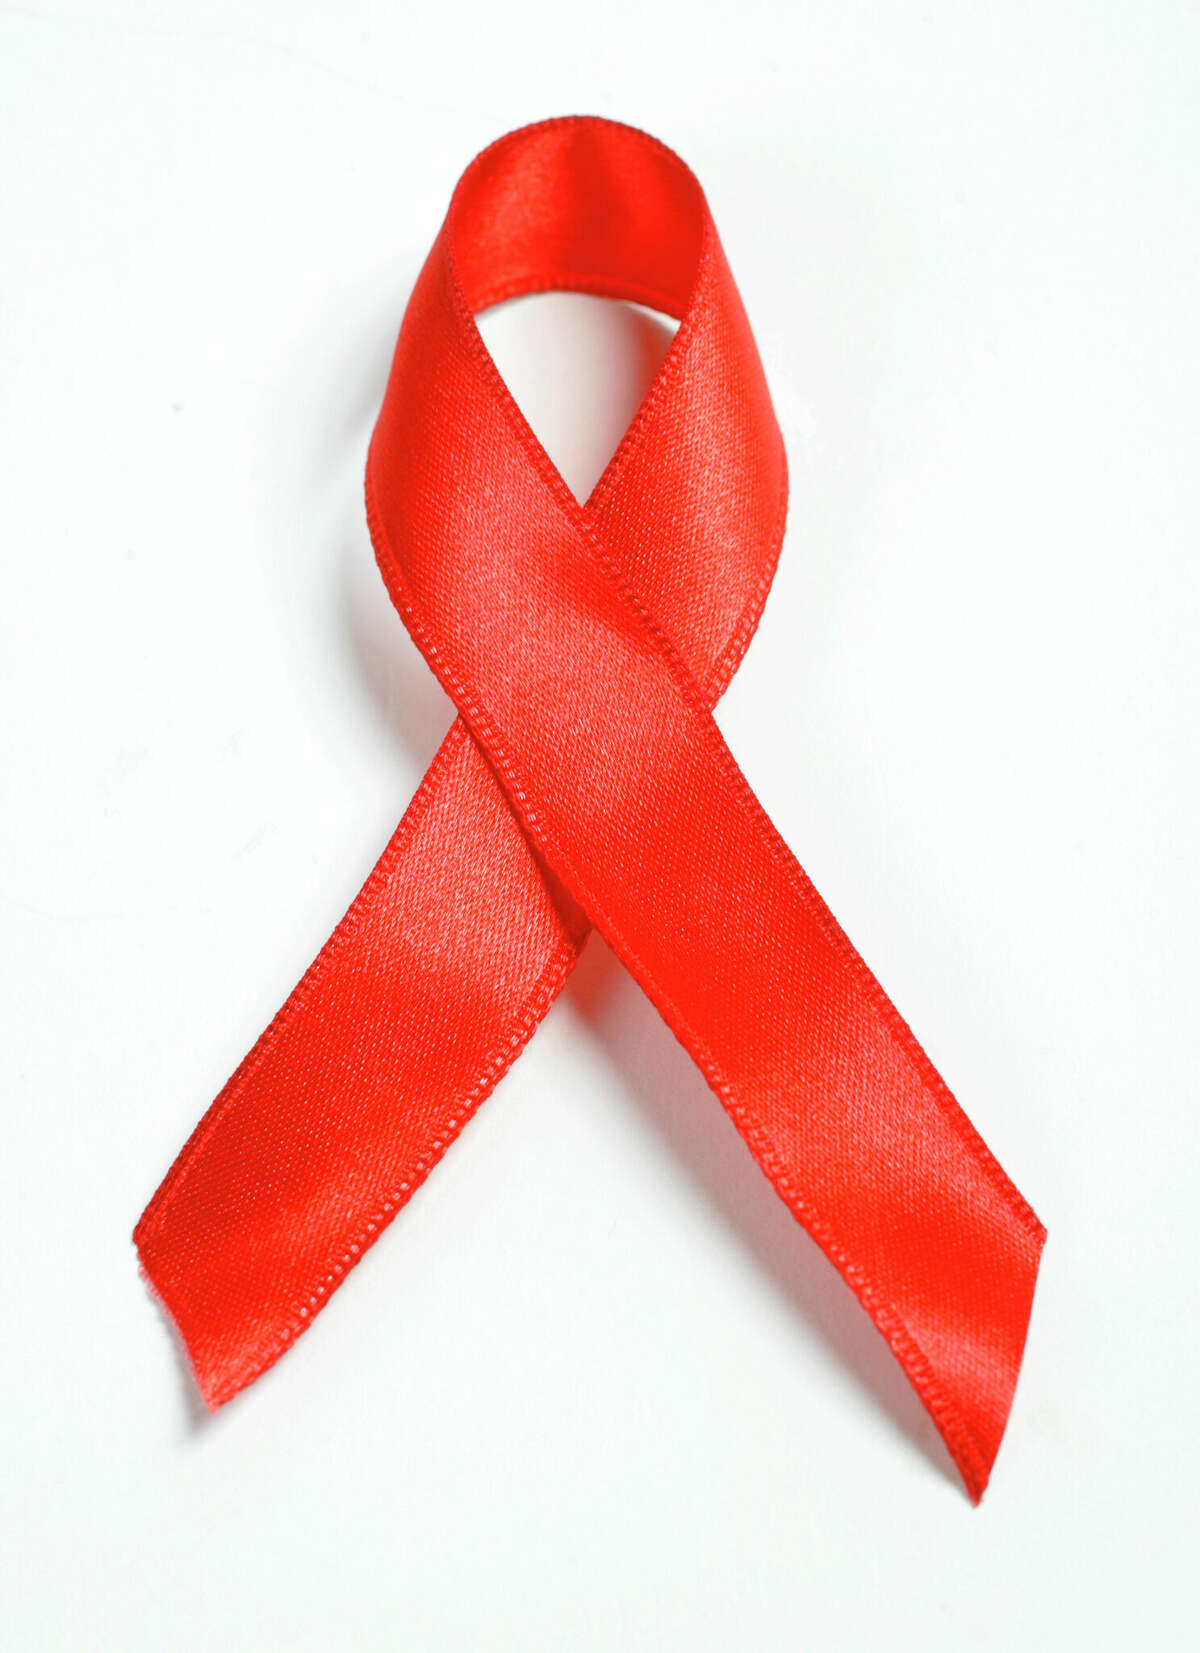 The red AIDS ribbon